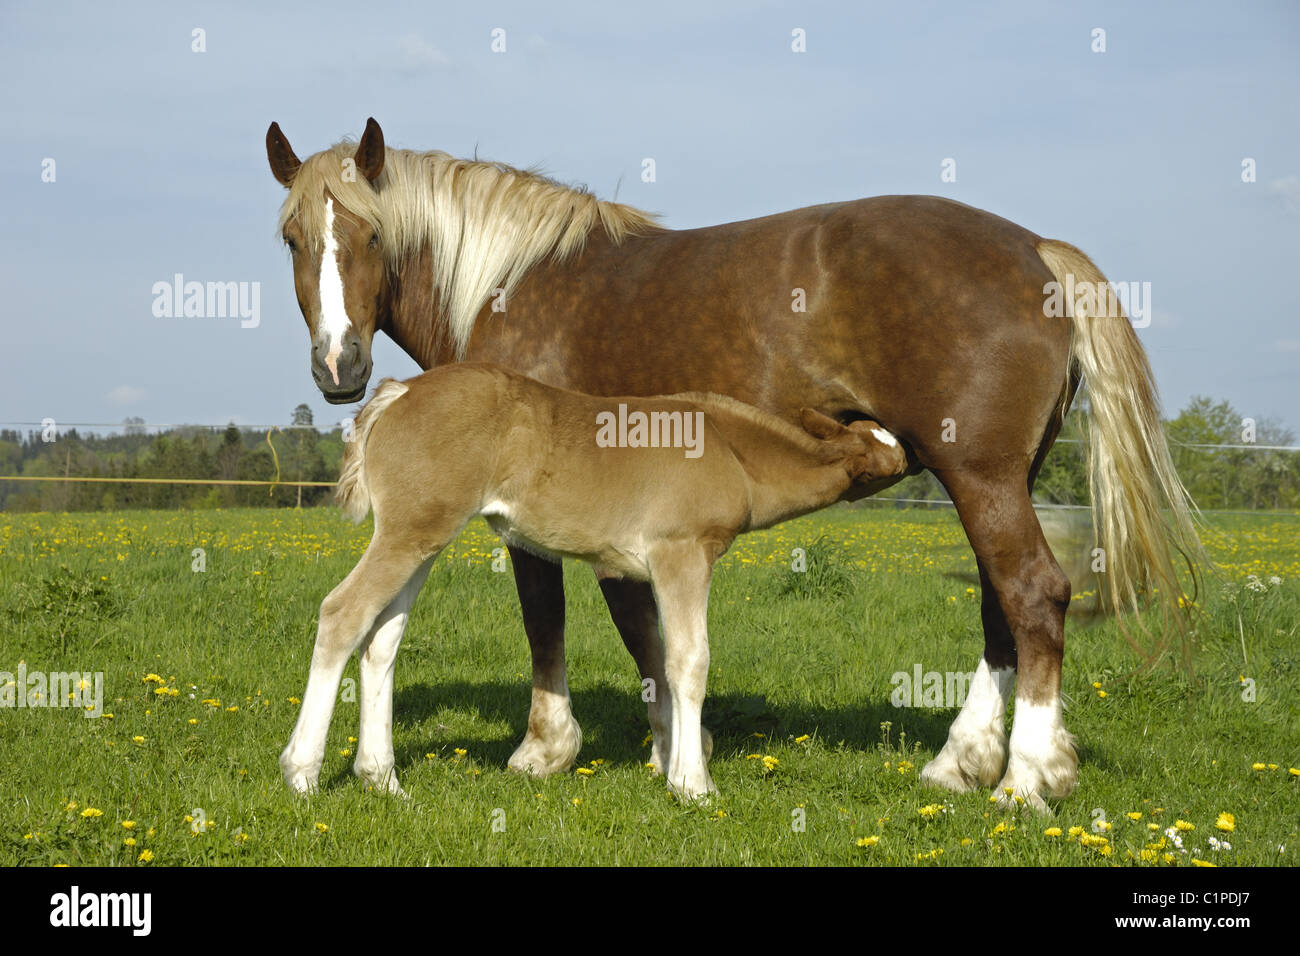 Draught horse, mare with foal Stock Photo